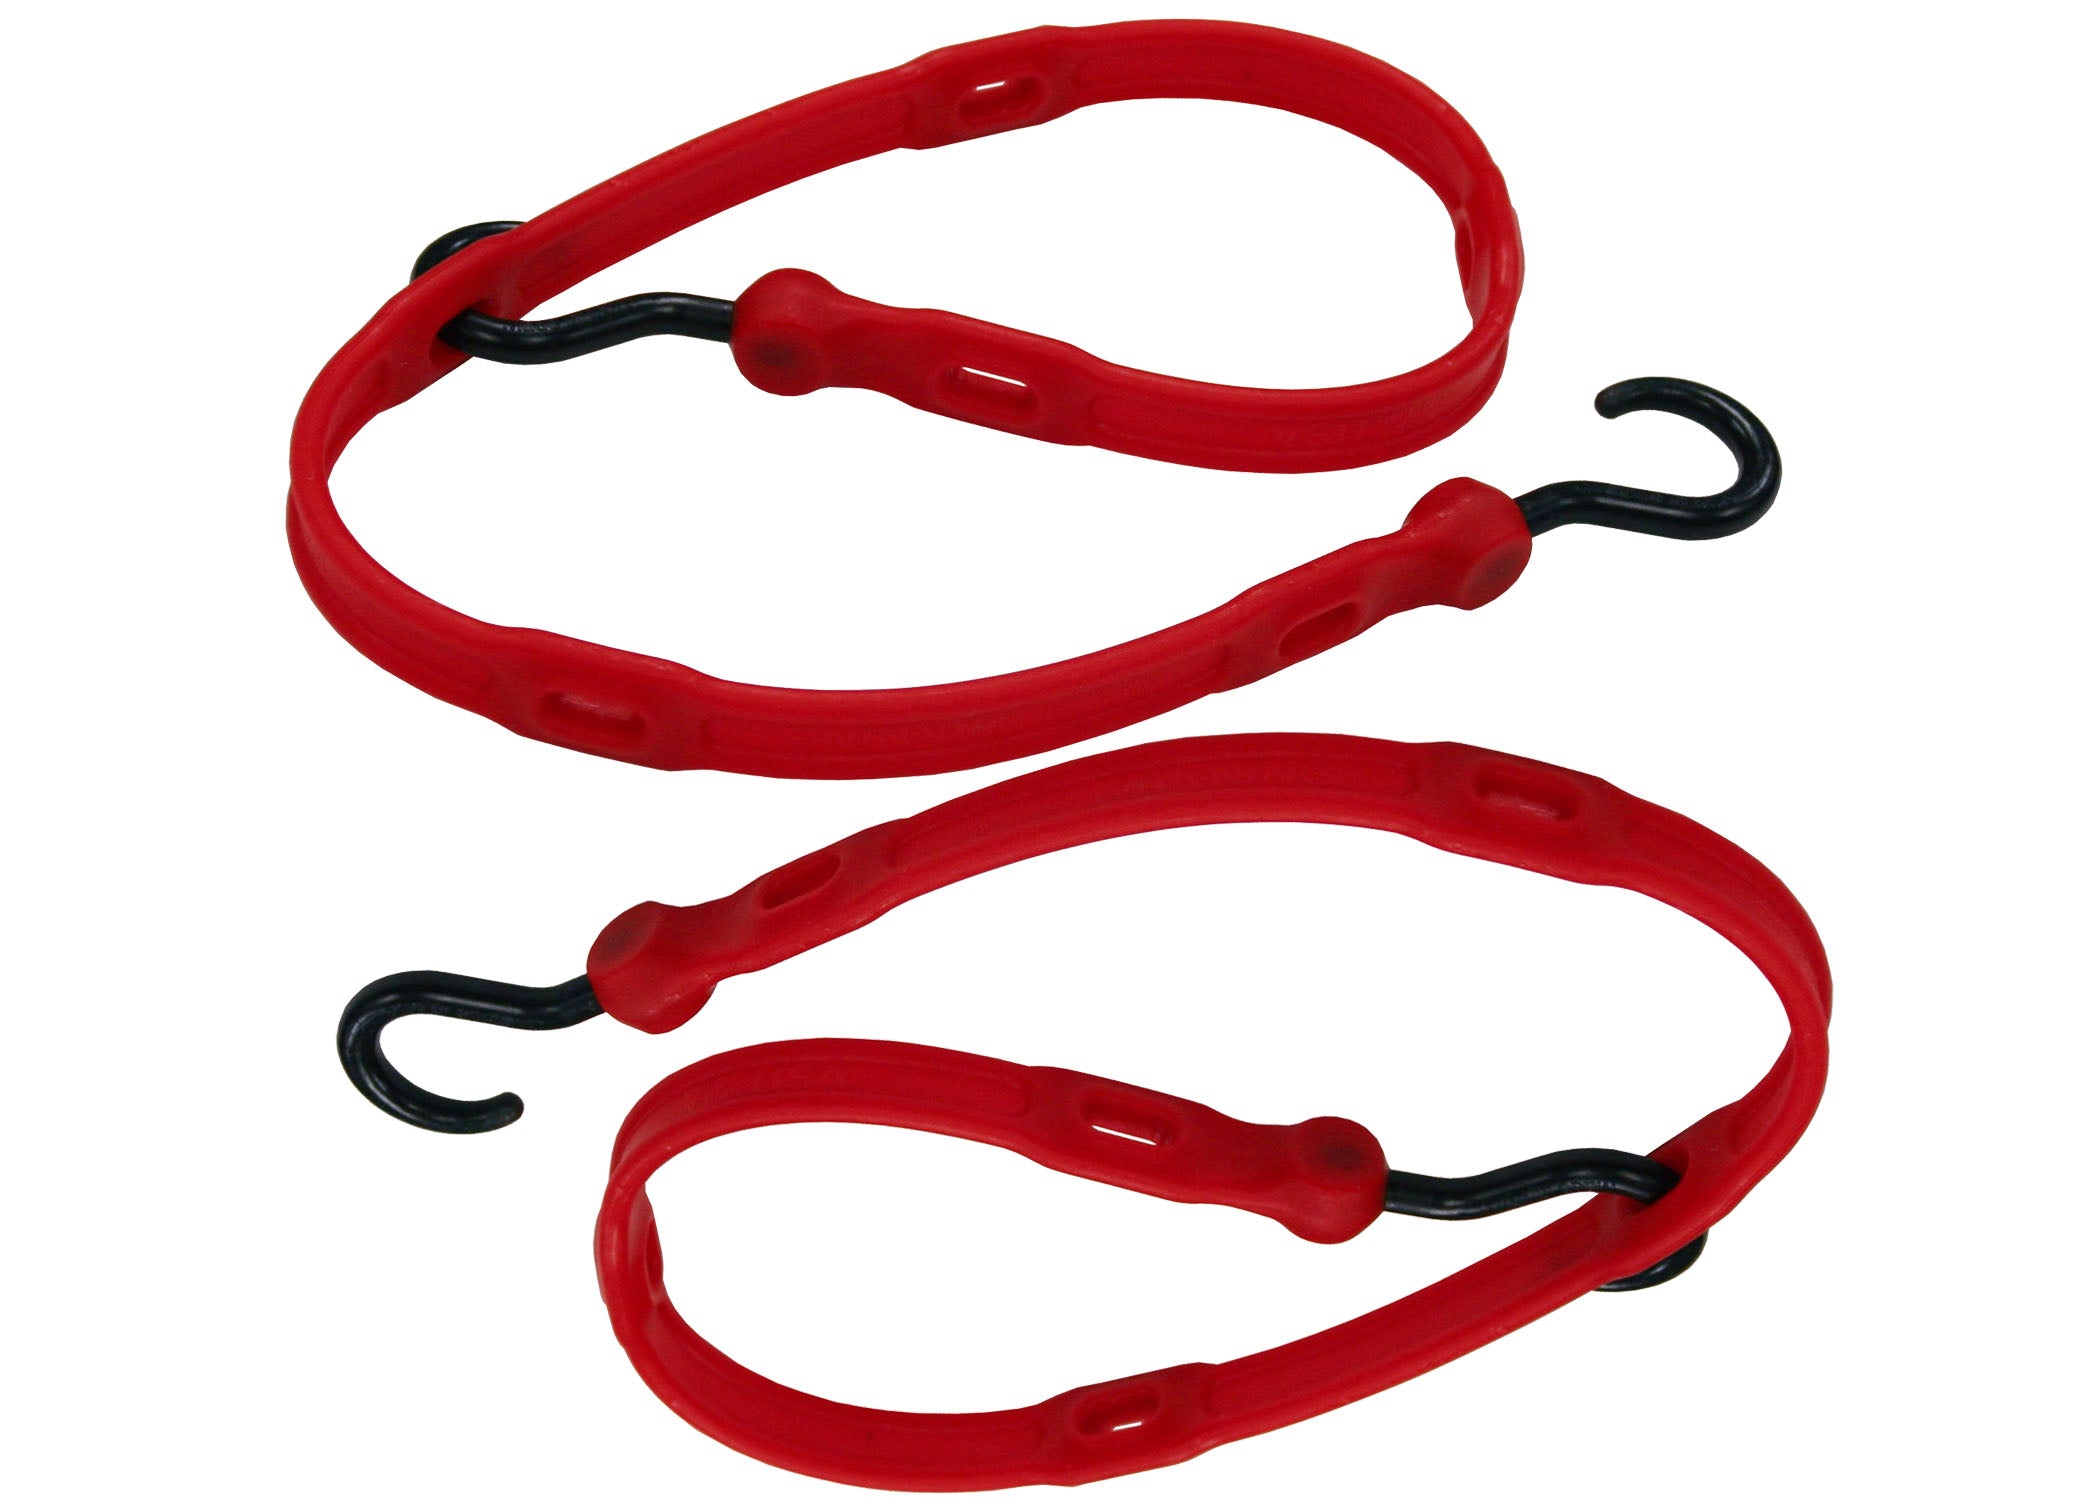 The Perfect Bungee, Adjust A Strap (4 Pack) - Premium USA Made Adjustable  Bungee Cords with Hooks (36 Inch) - Heavy Duty, Durable, All Weather, Up to